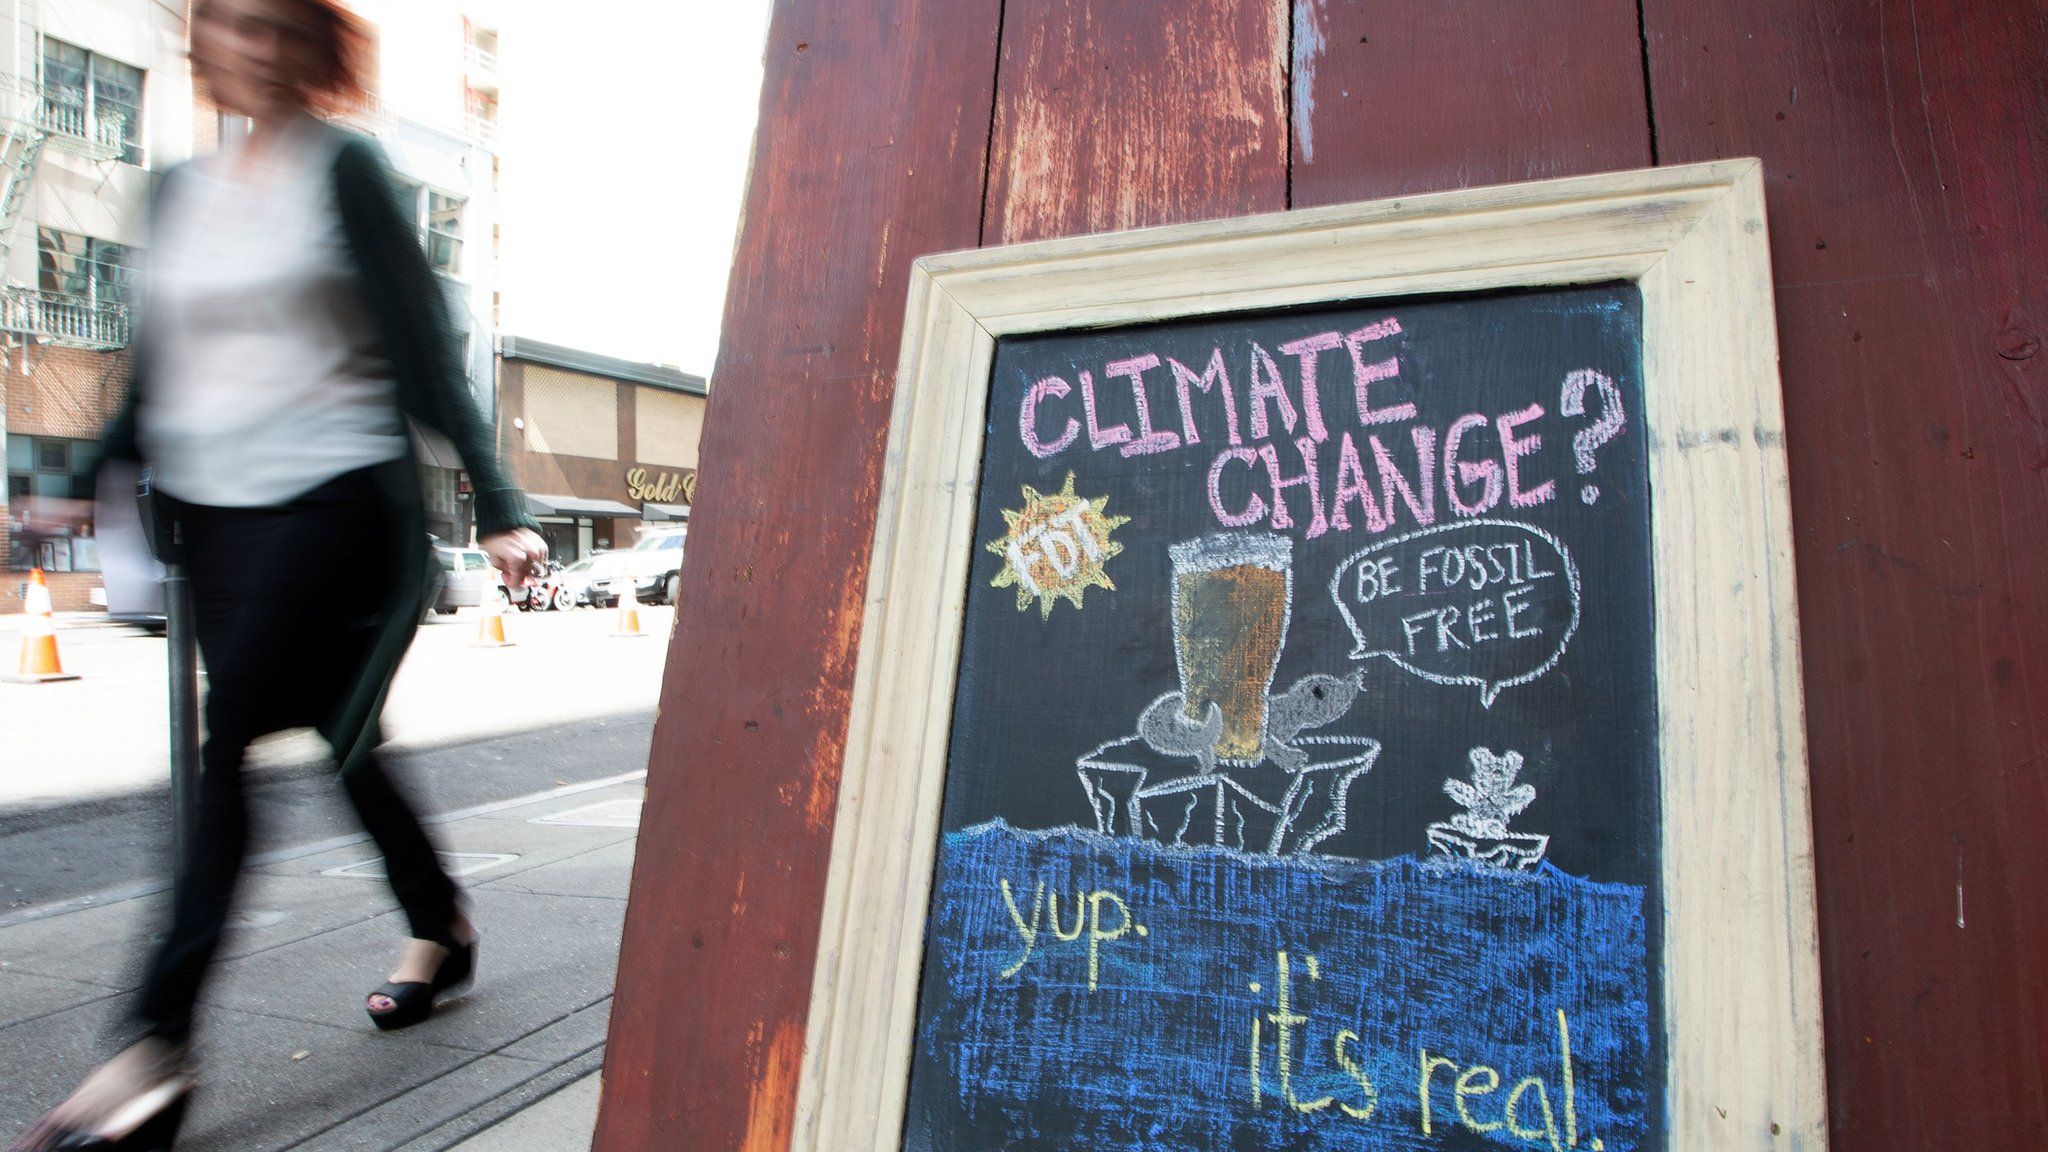 A woman walks by a sign about climate change in front of a bar in downtown San Francisco. September 2018